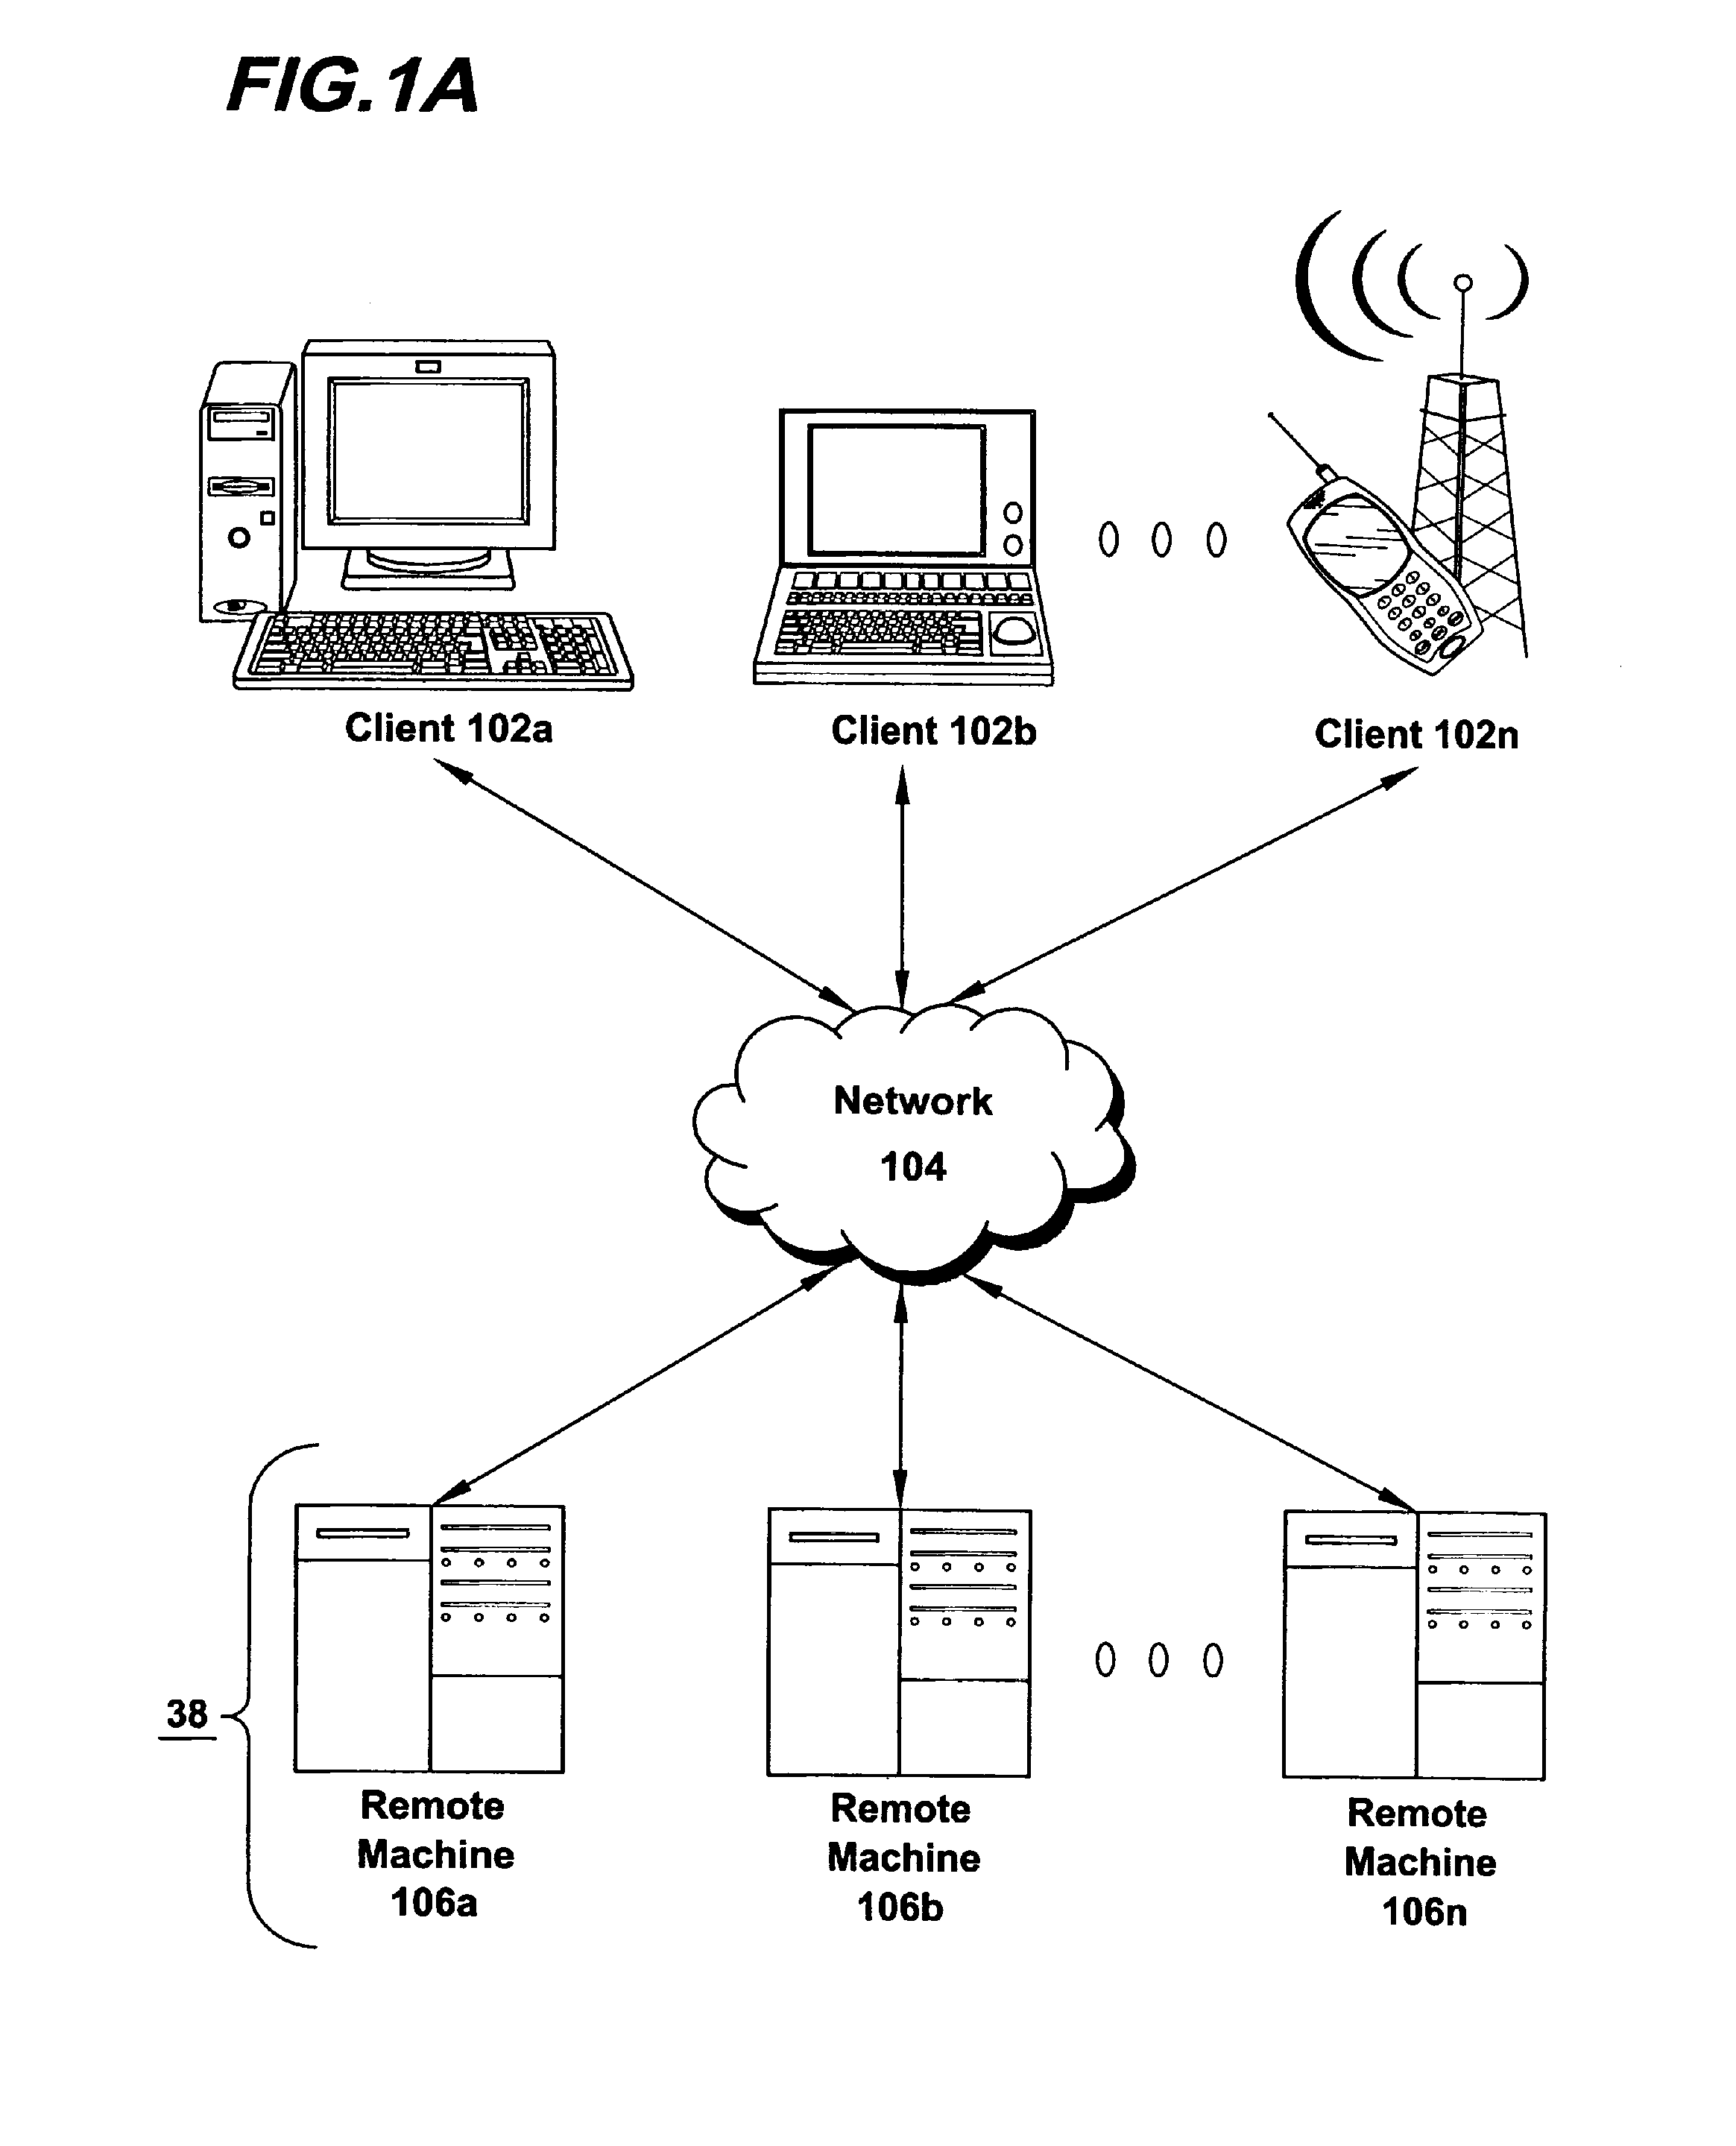 Methods and Systems for Using External Display Devices With a Mobile Computing Device